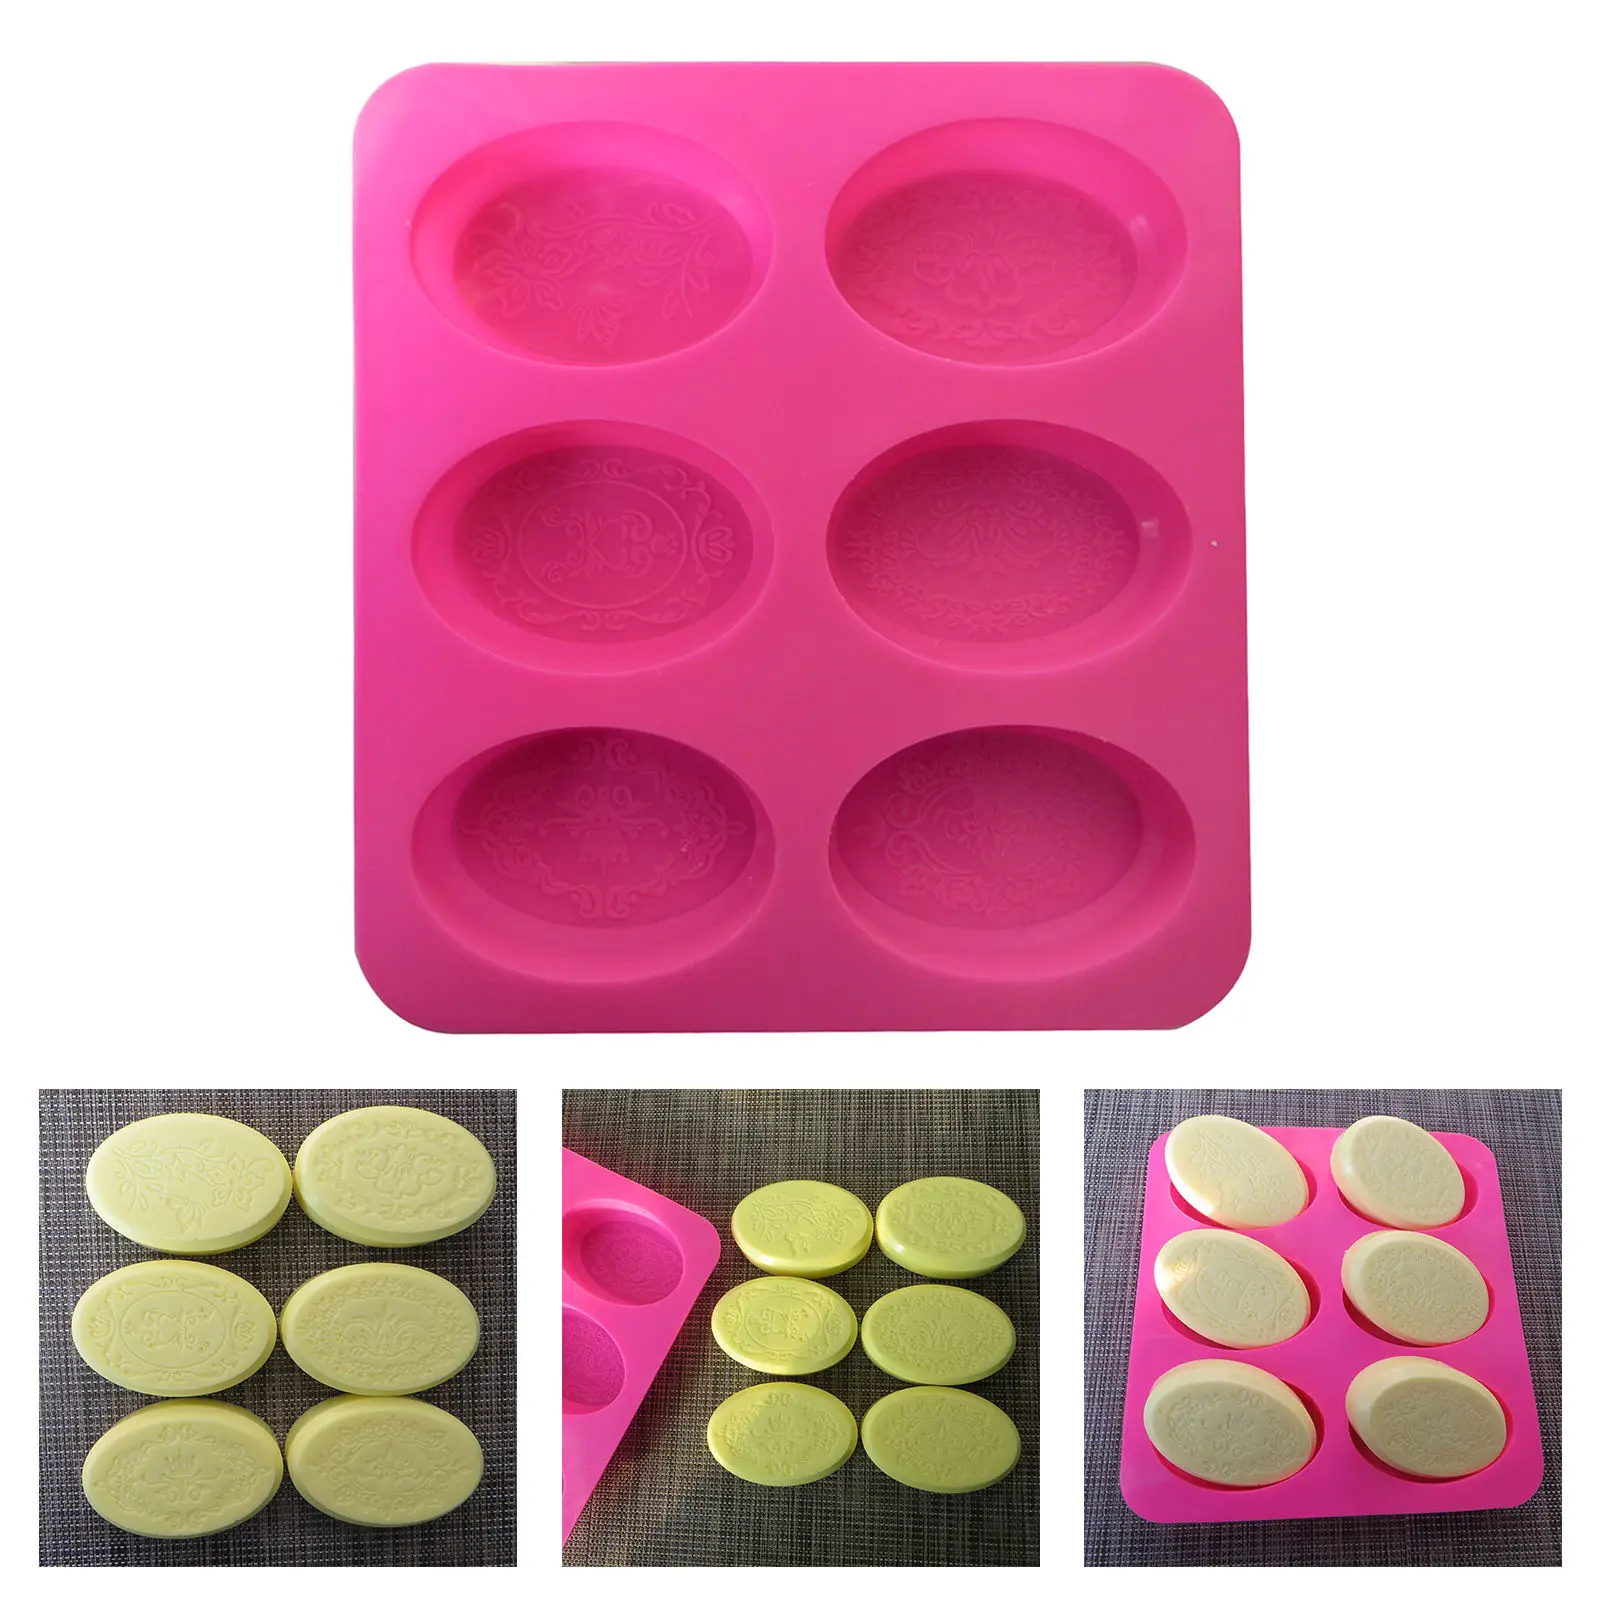 7-Cavity Lace Silicone DIY Epoxy Resin Casting Soap Molds Handmade for Candy Soap Candle Chocolate Making Supplies